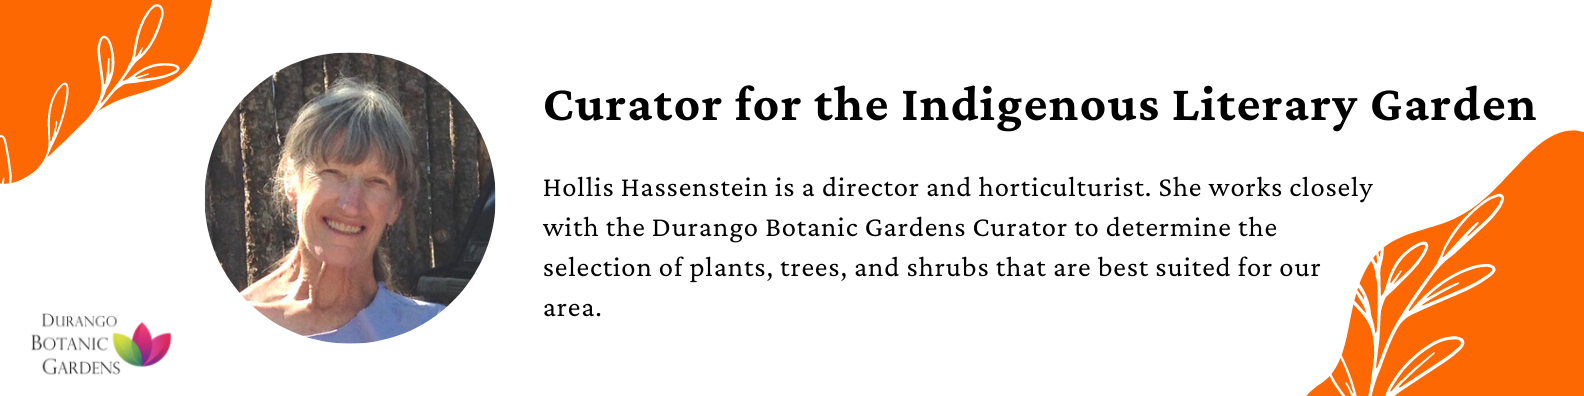 Hollis Hassenstein is the co-curator for the Indigenous Literary Garden.